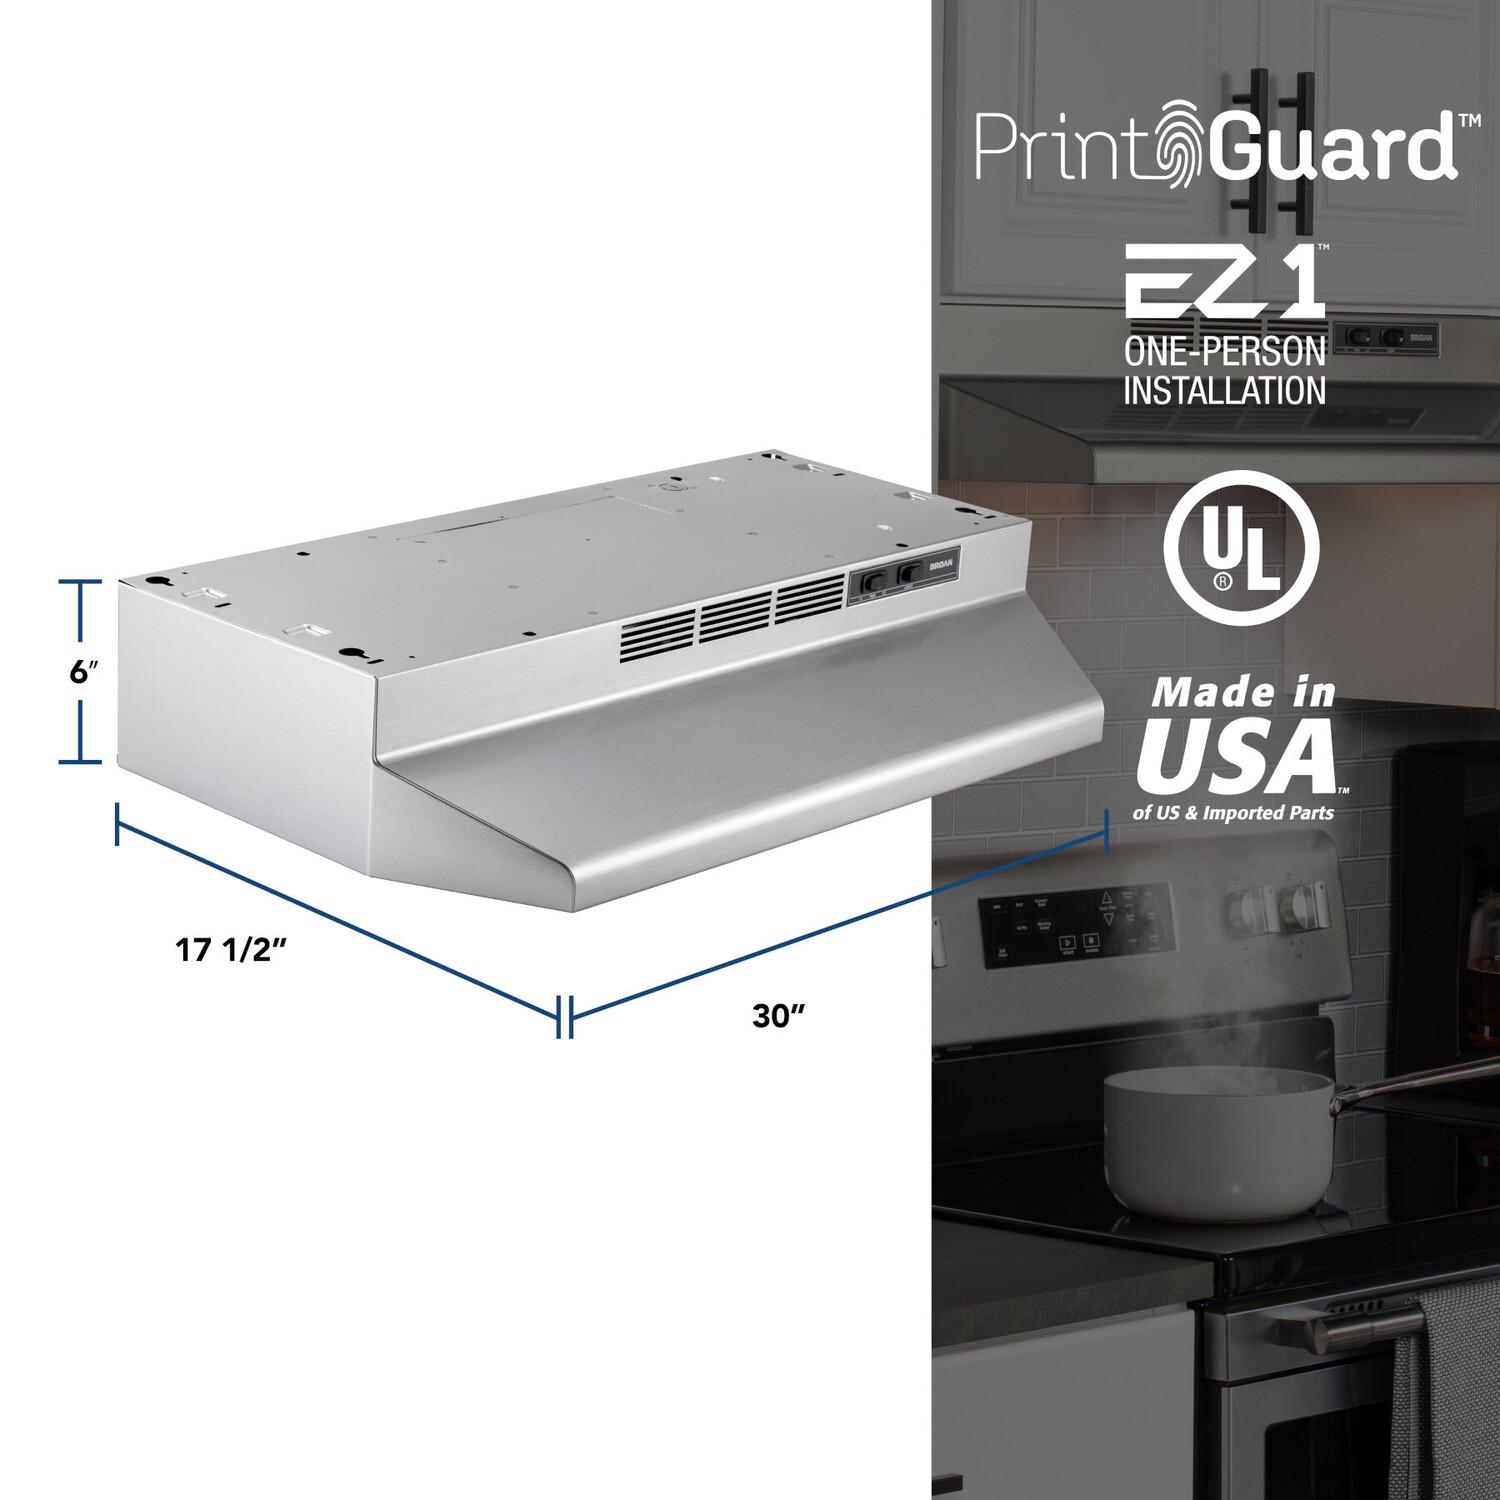 Broan® 30-Inch Ductless Under-Cabinet Range Hood w/ Easy Install System, Stainless Finish